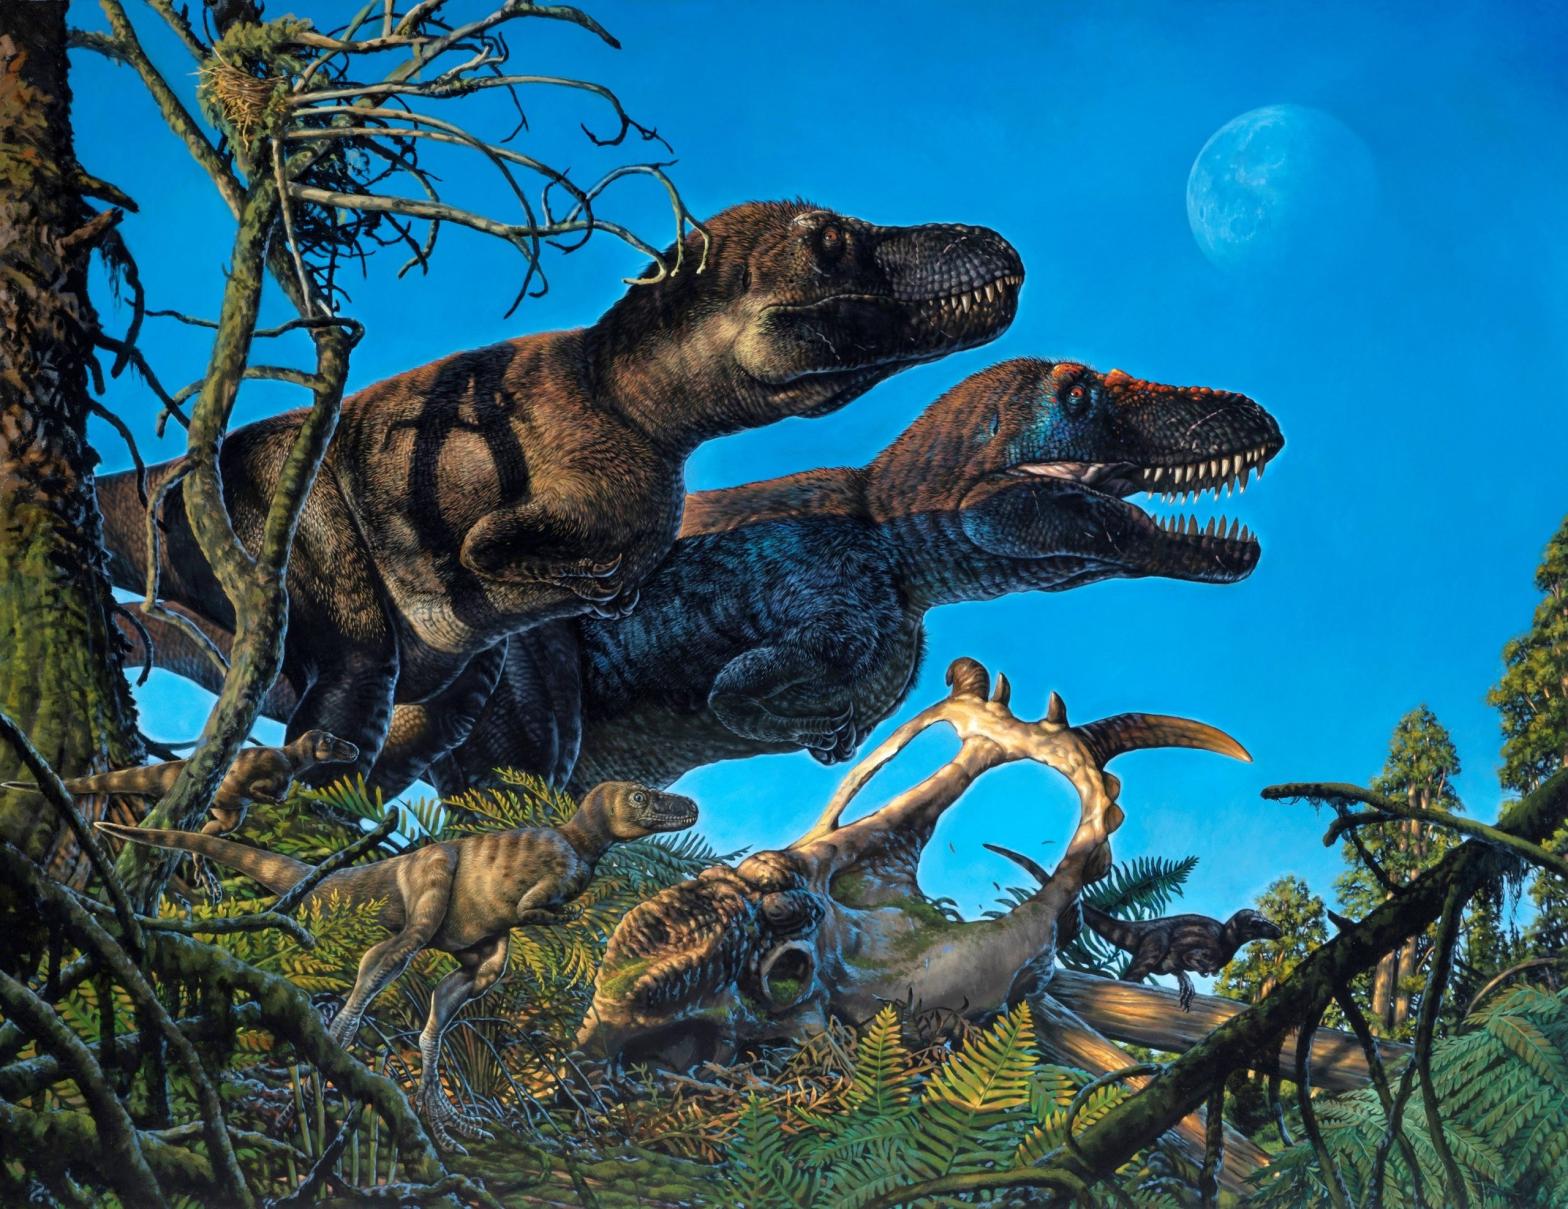 A paleoart depiction of the tyrannosaur Nanuqsaurus with its young. (Illustration: James Havens)